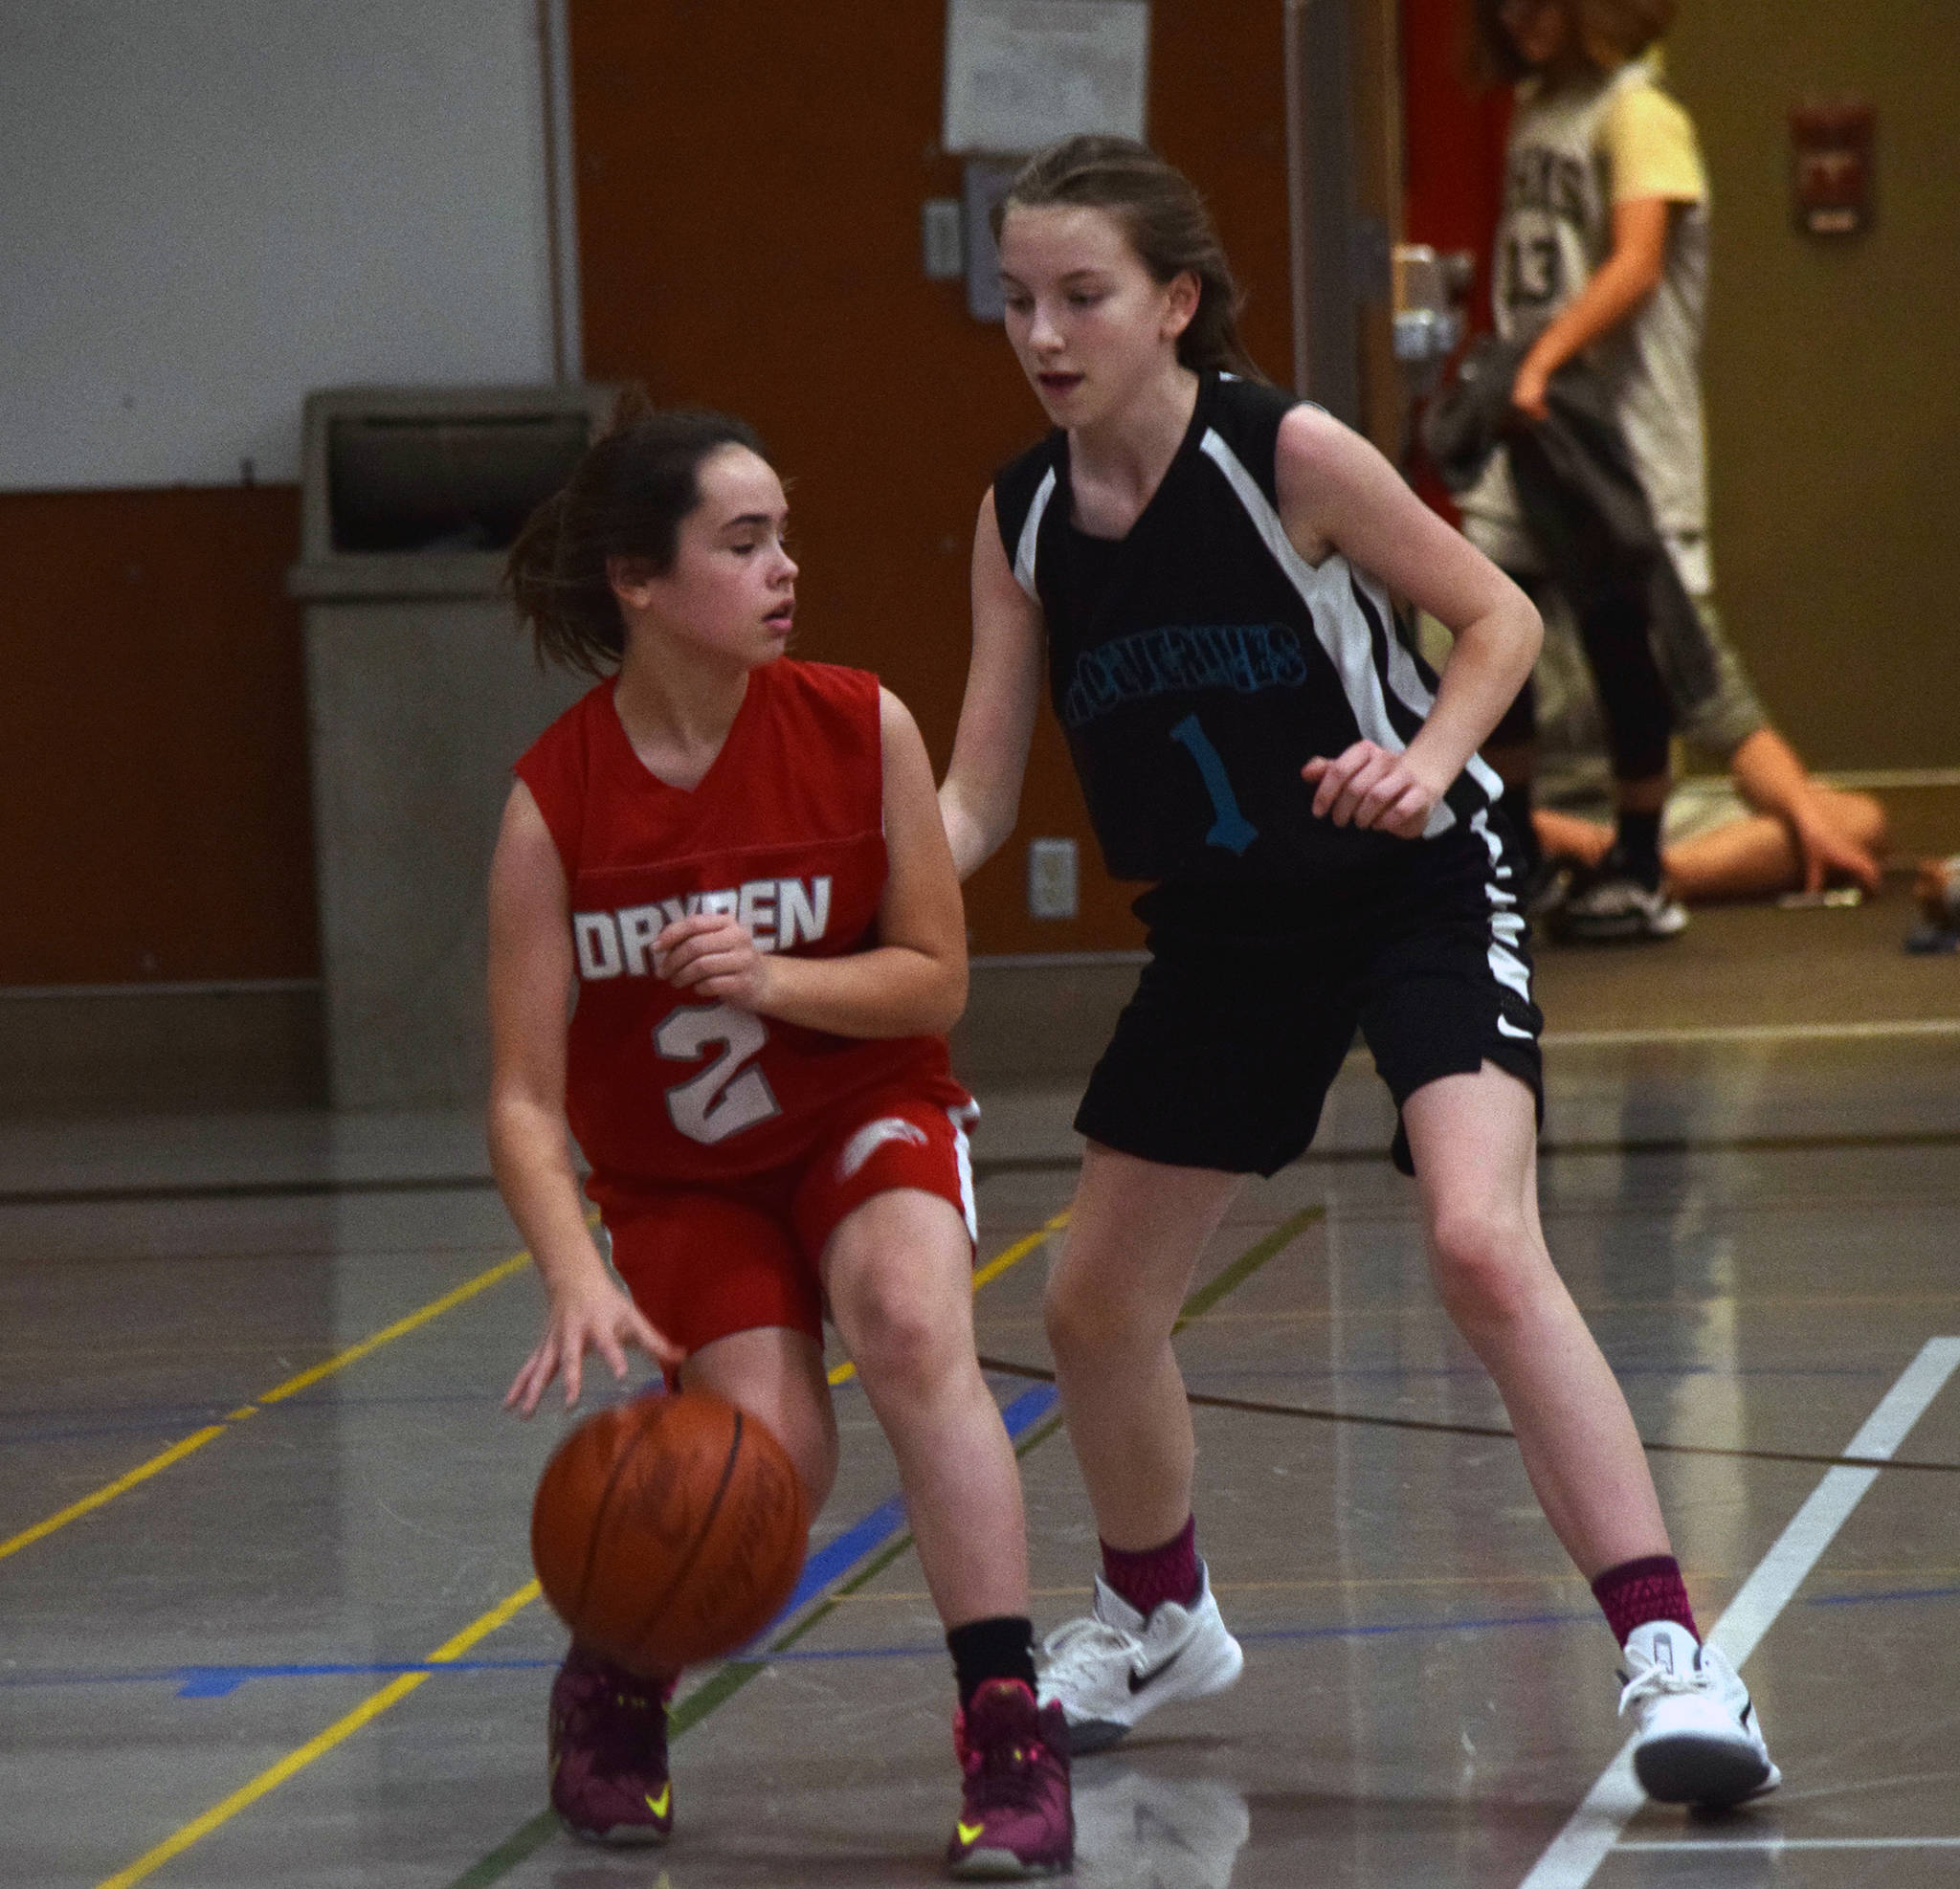 Floyd Dryden’s Jadid Polanco protects the ball as Dzantik’i Heeni’s Jenna Dobson defends during a round-robin game at the Icebreaker Tournament at FDMS on Friday, Dec. 6, 2019. (Nolin Ainsworth | Juneau Empire)